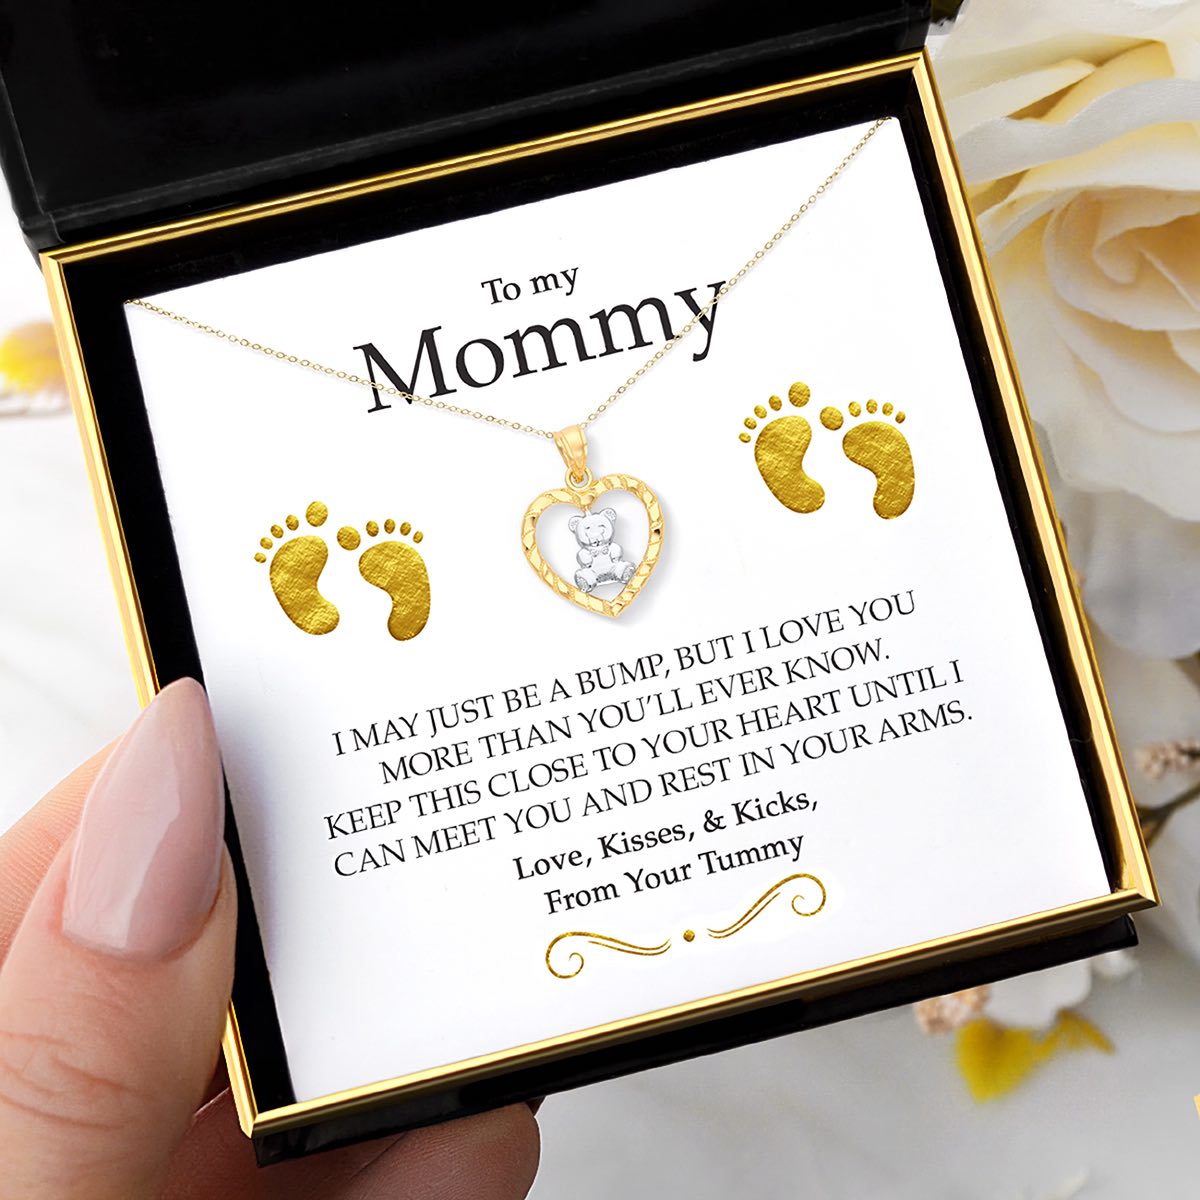 To My Mommy - Solid Gold Teddy Bear Necklace Gift Set